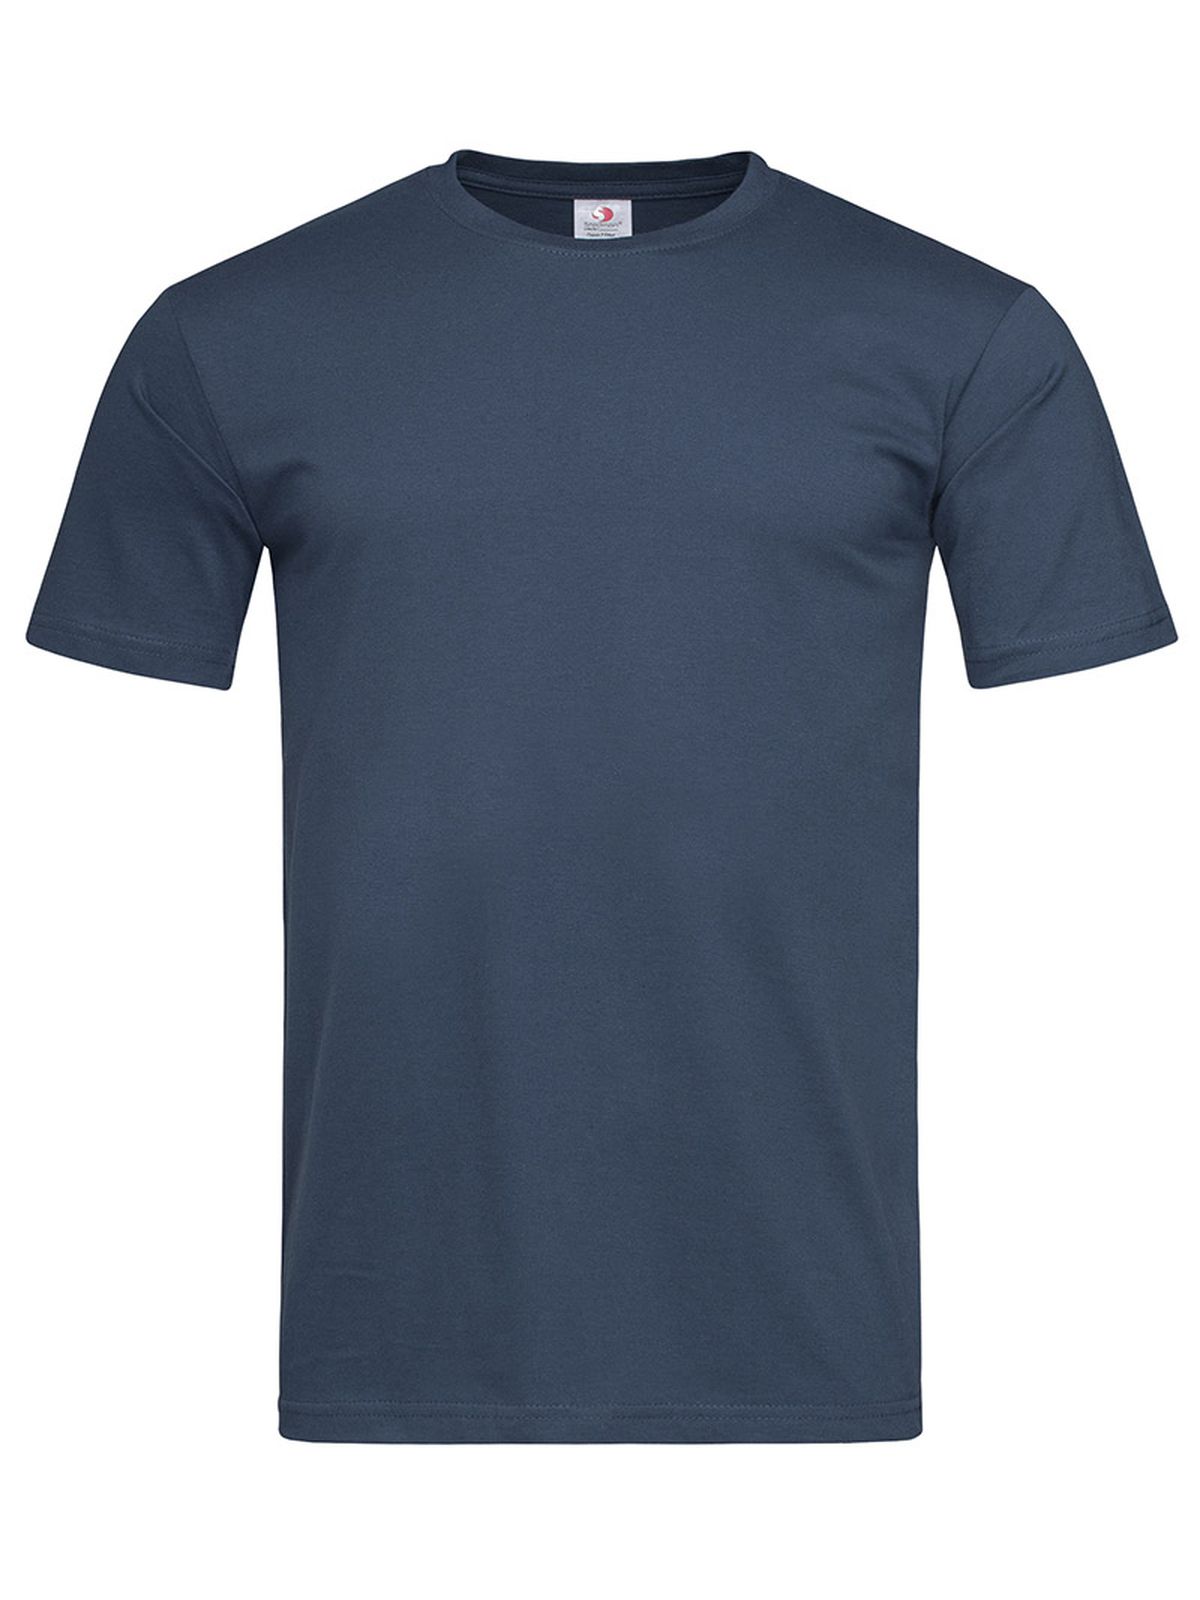 classic-t-fitted-navy-blue.webp